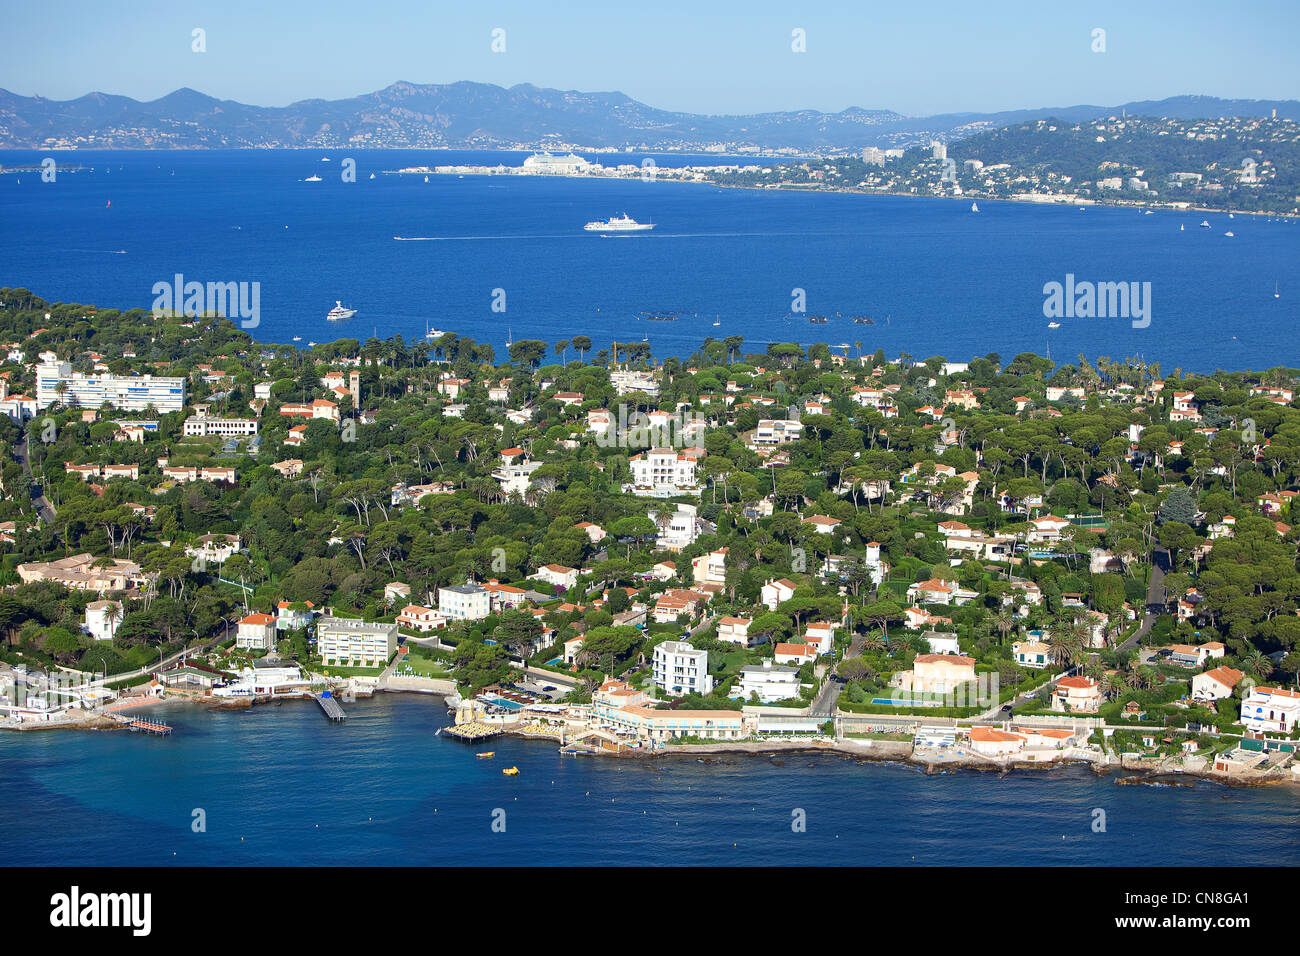 France, Alpes Maritimes, Antibes, Cap d'Antibes, Cannes in the background (aerial view) Stock Photo